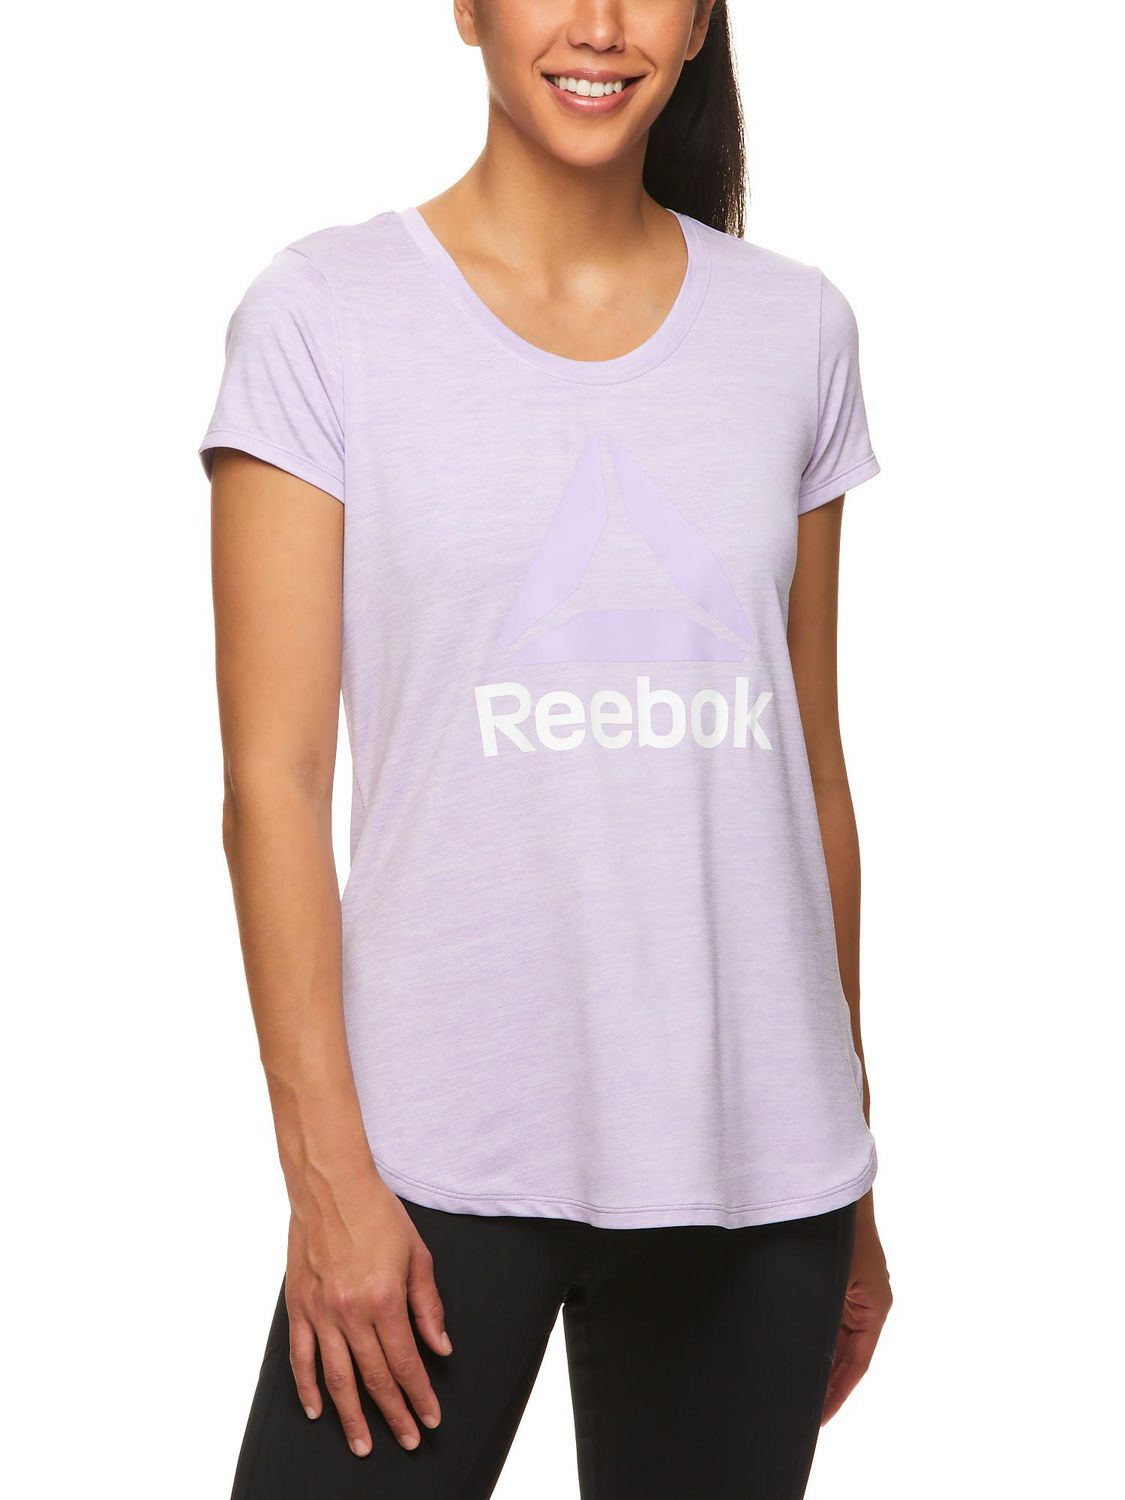 Walmart Canada - New to store men's and women's Reebok clothing